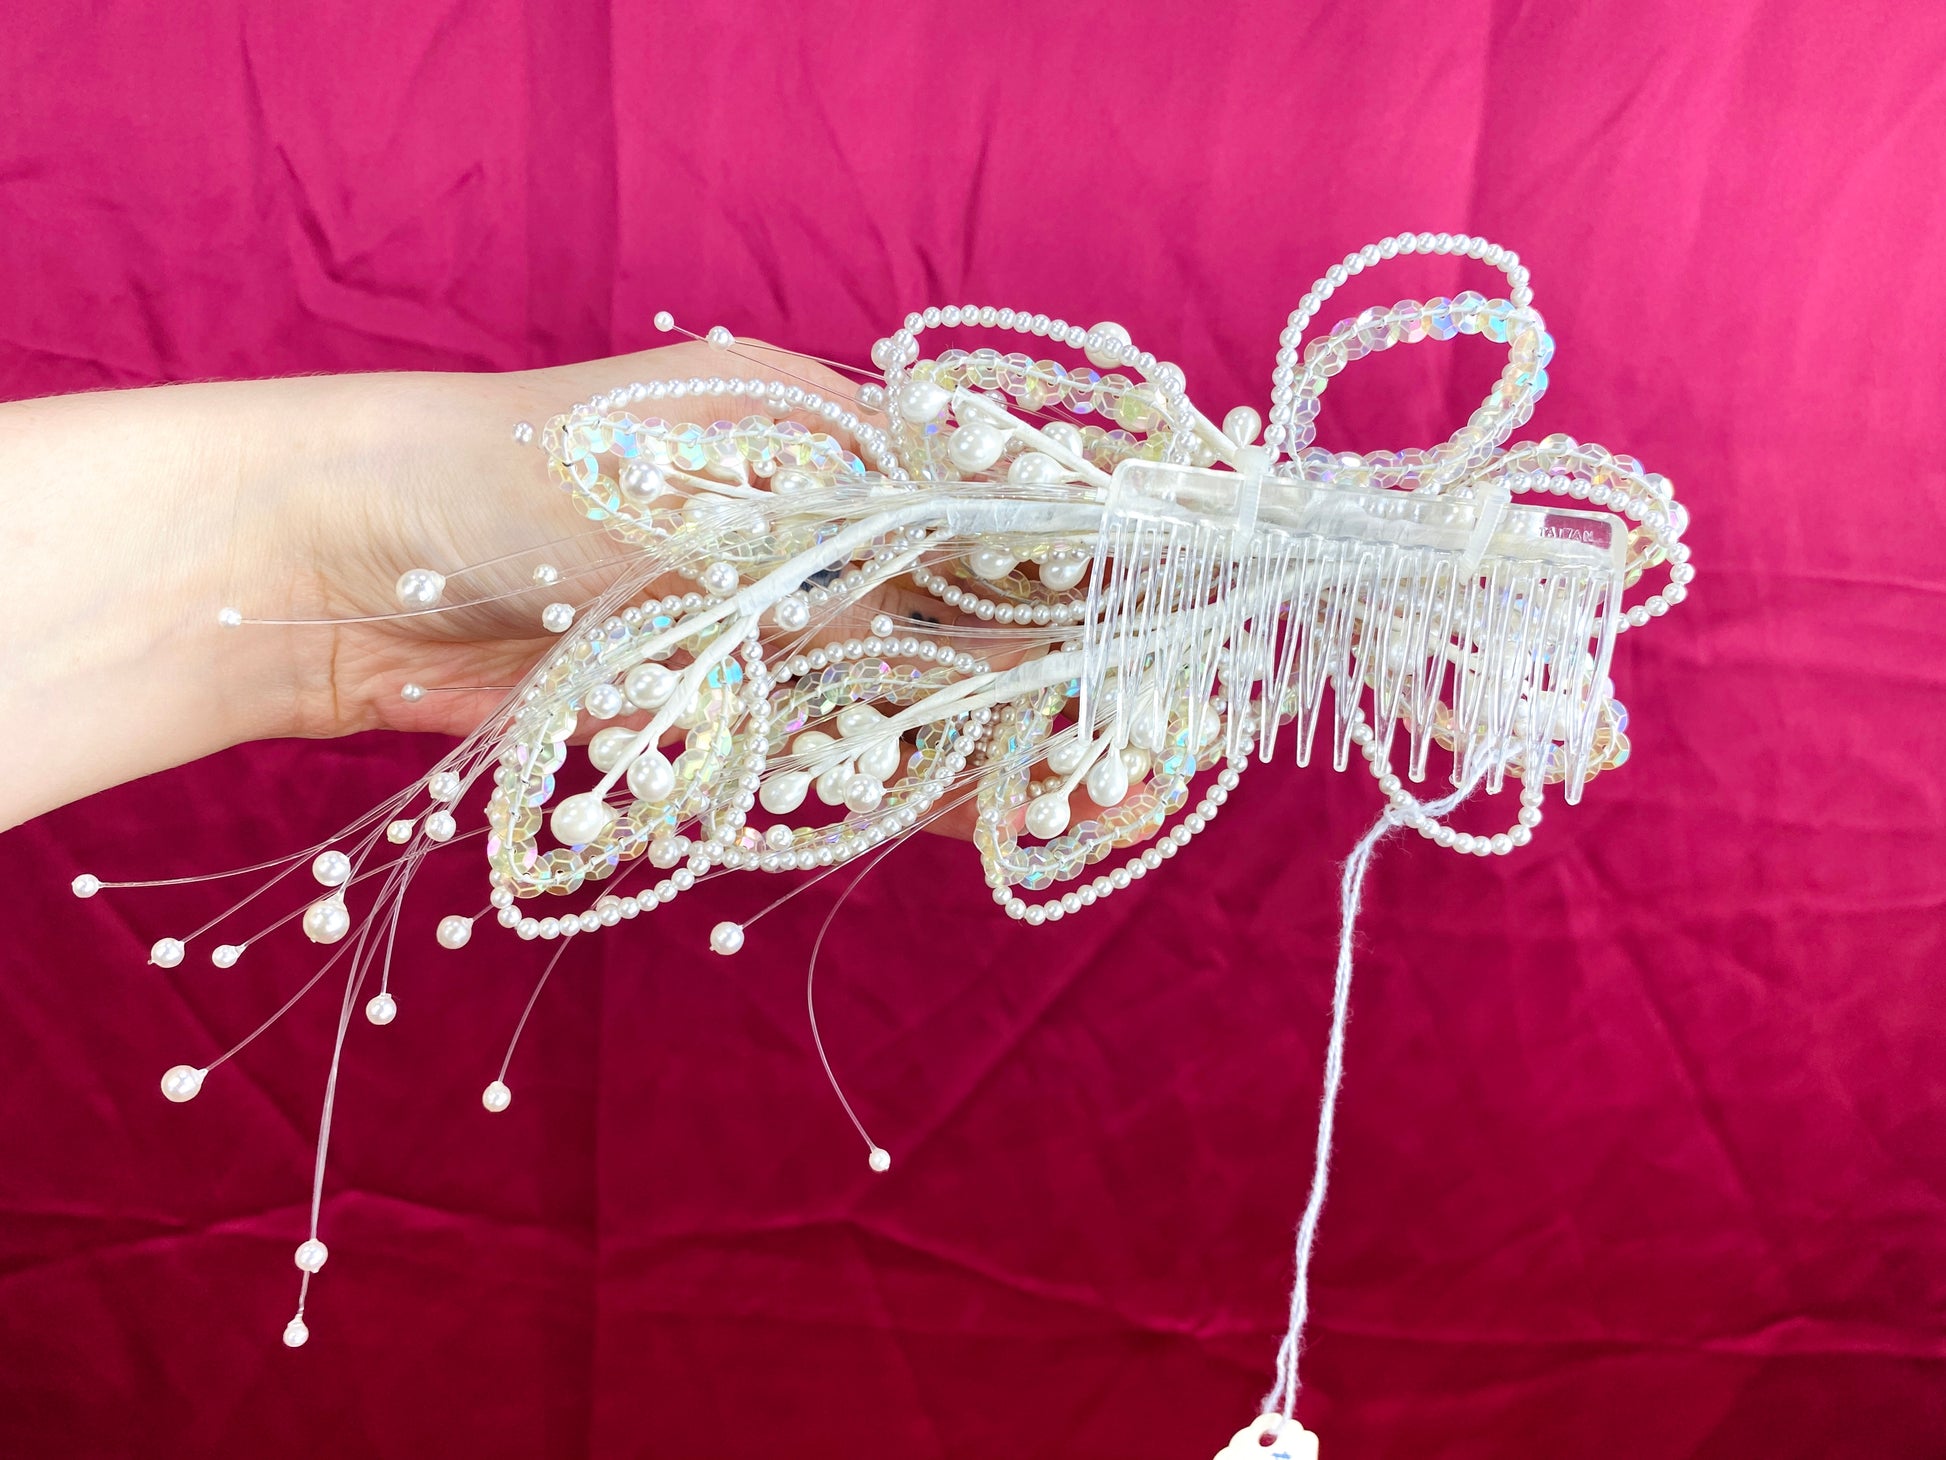 Vintage 80s/90s Aurora Sequin and Pearl Bead Bridal Hair Comb